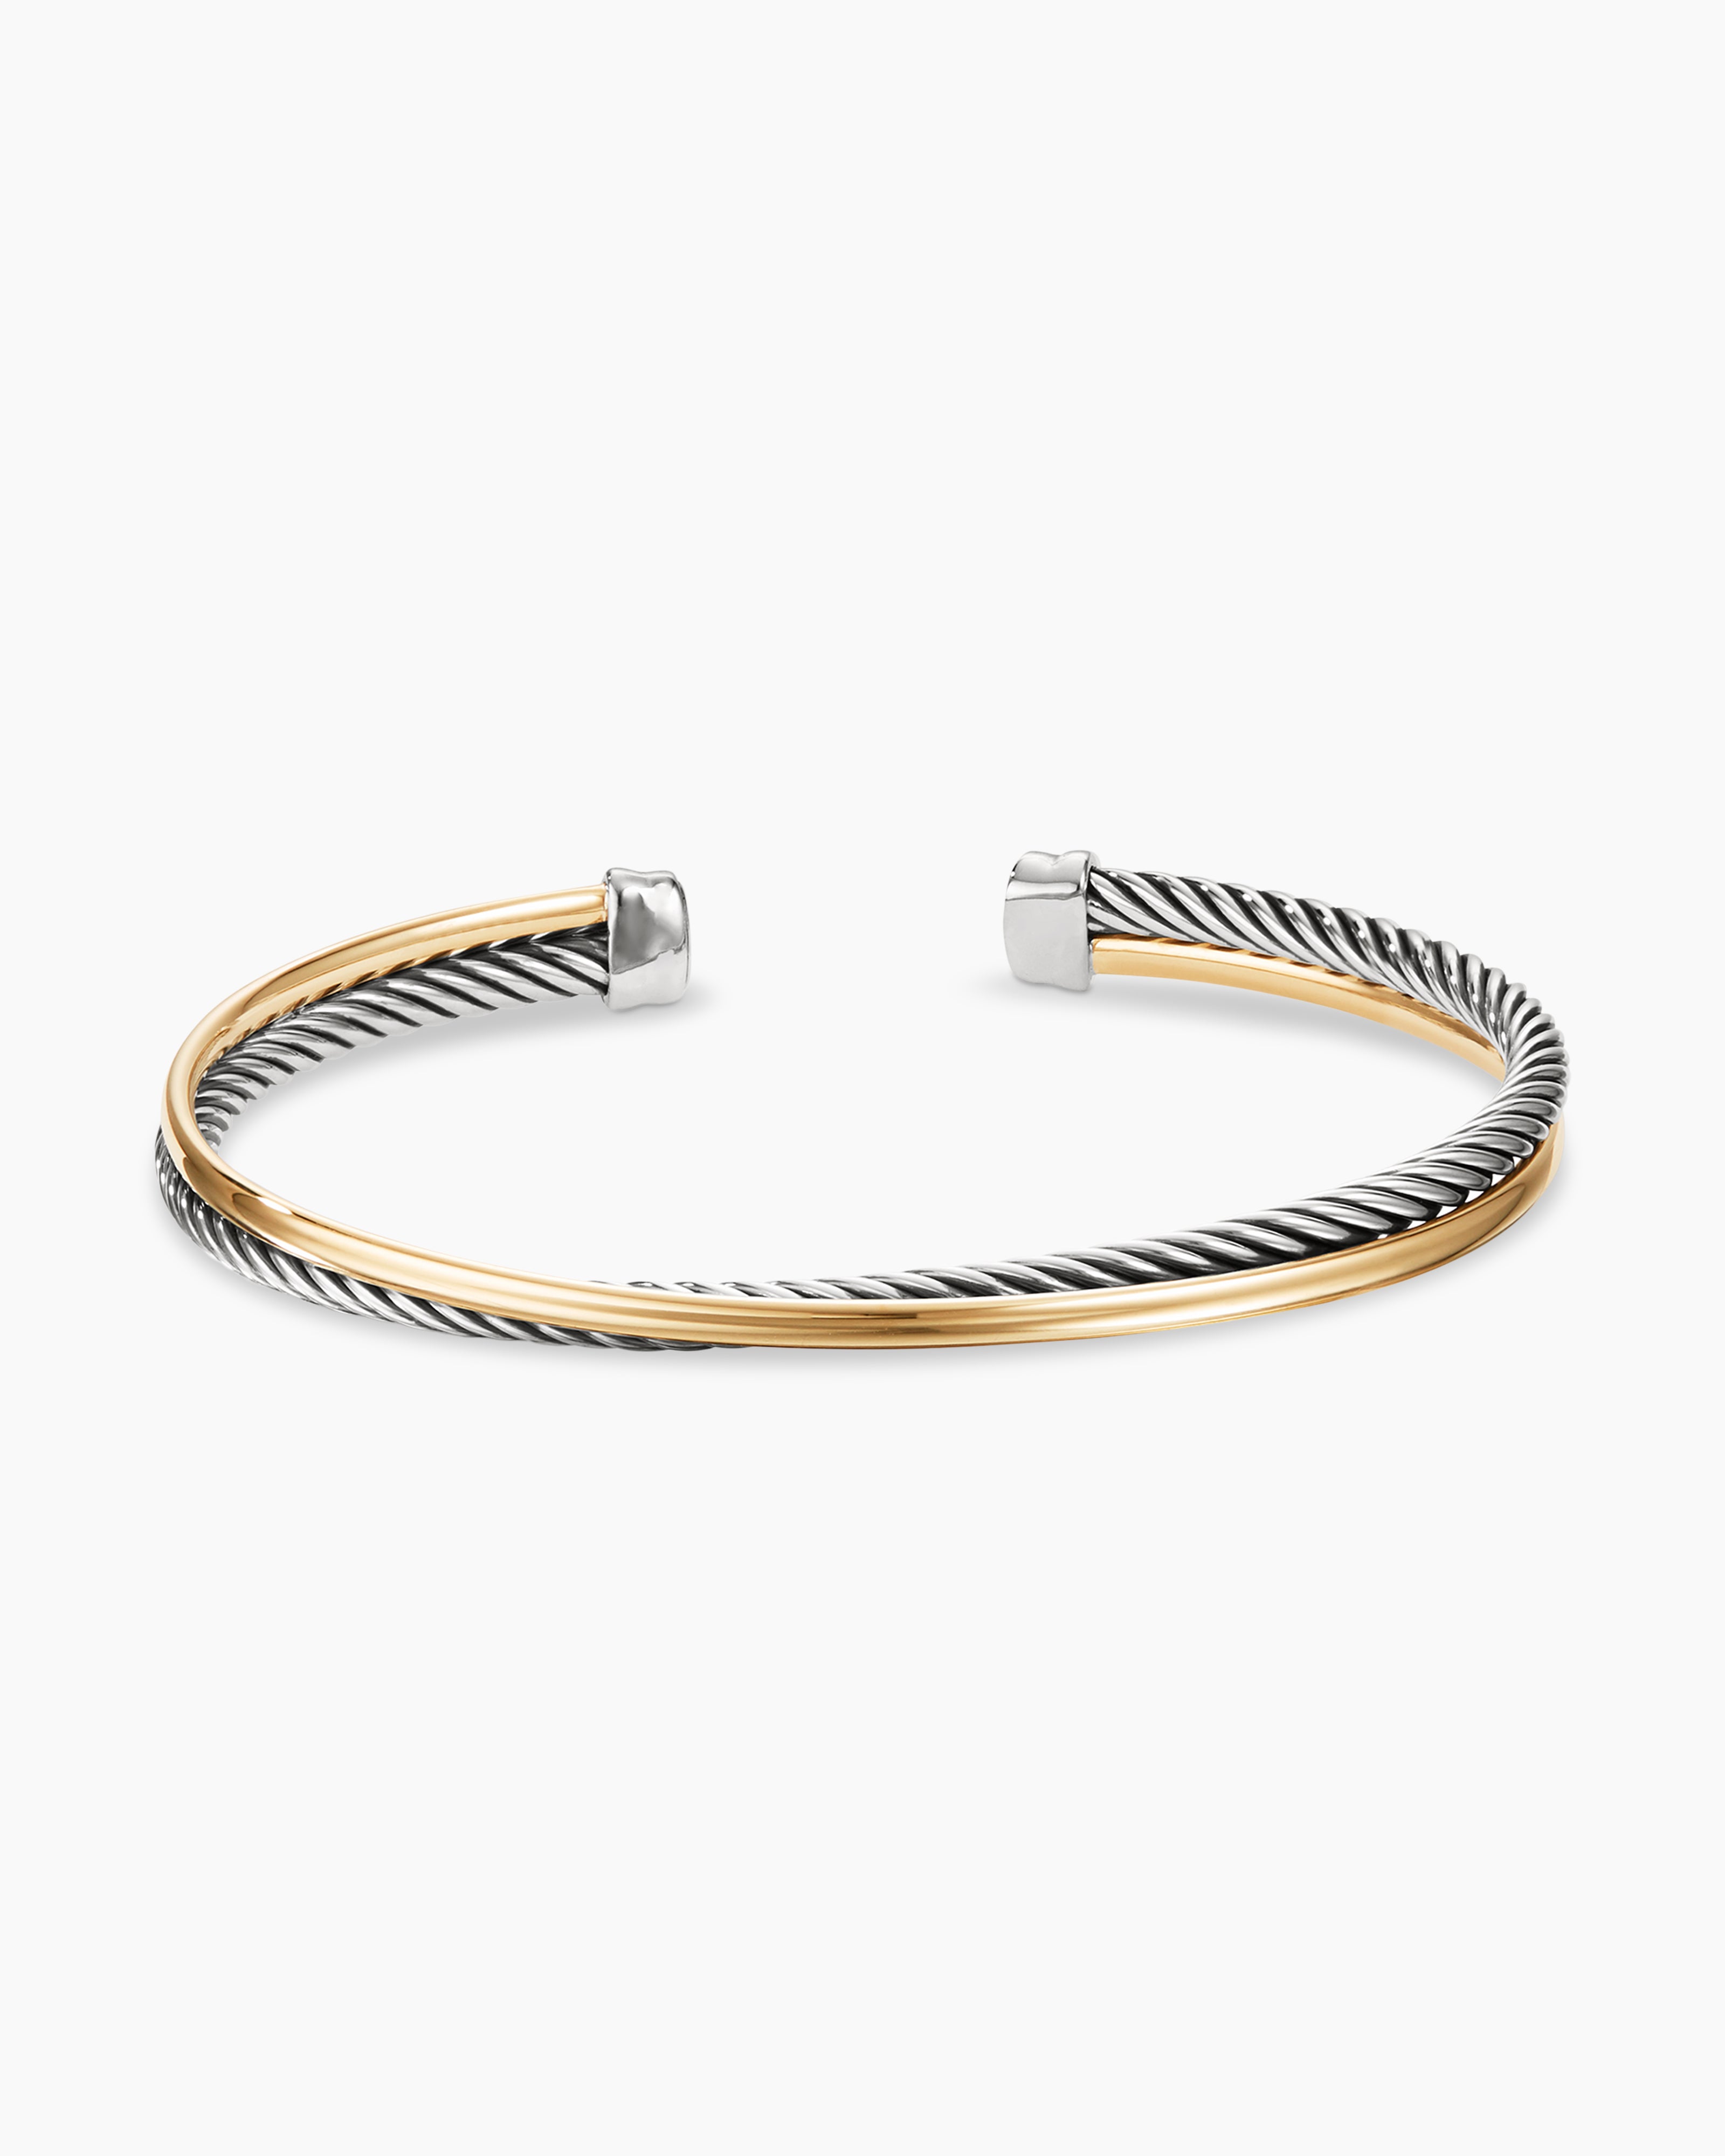 David Yurman Crossover Linked Bracelet, Silver And Gold, Preowned In  Dustbag, WA001 - Julia Rose Boston | Shop